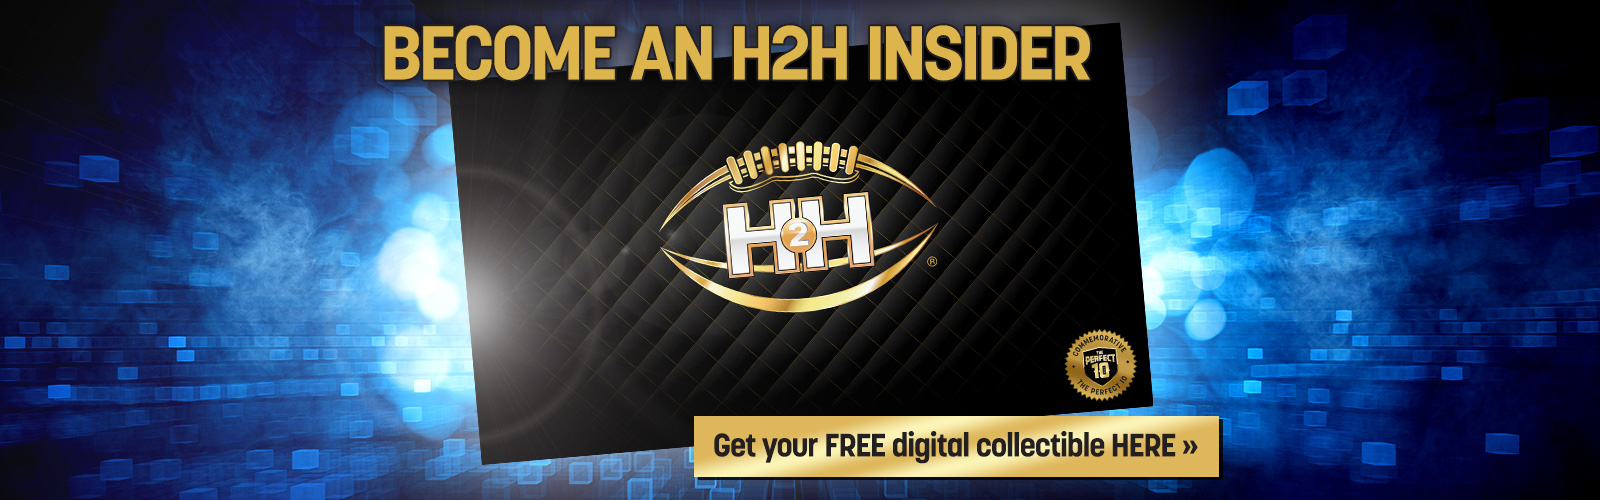 Be an H2H Insider.  Download your FREE Digital Collectible.